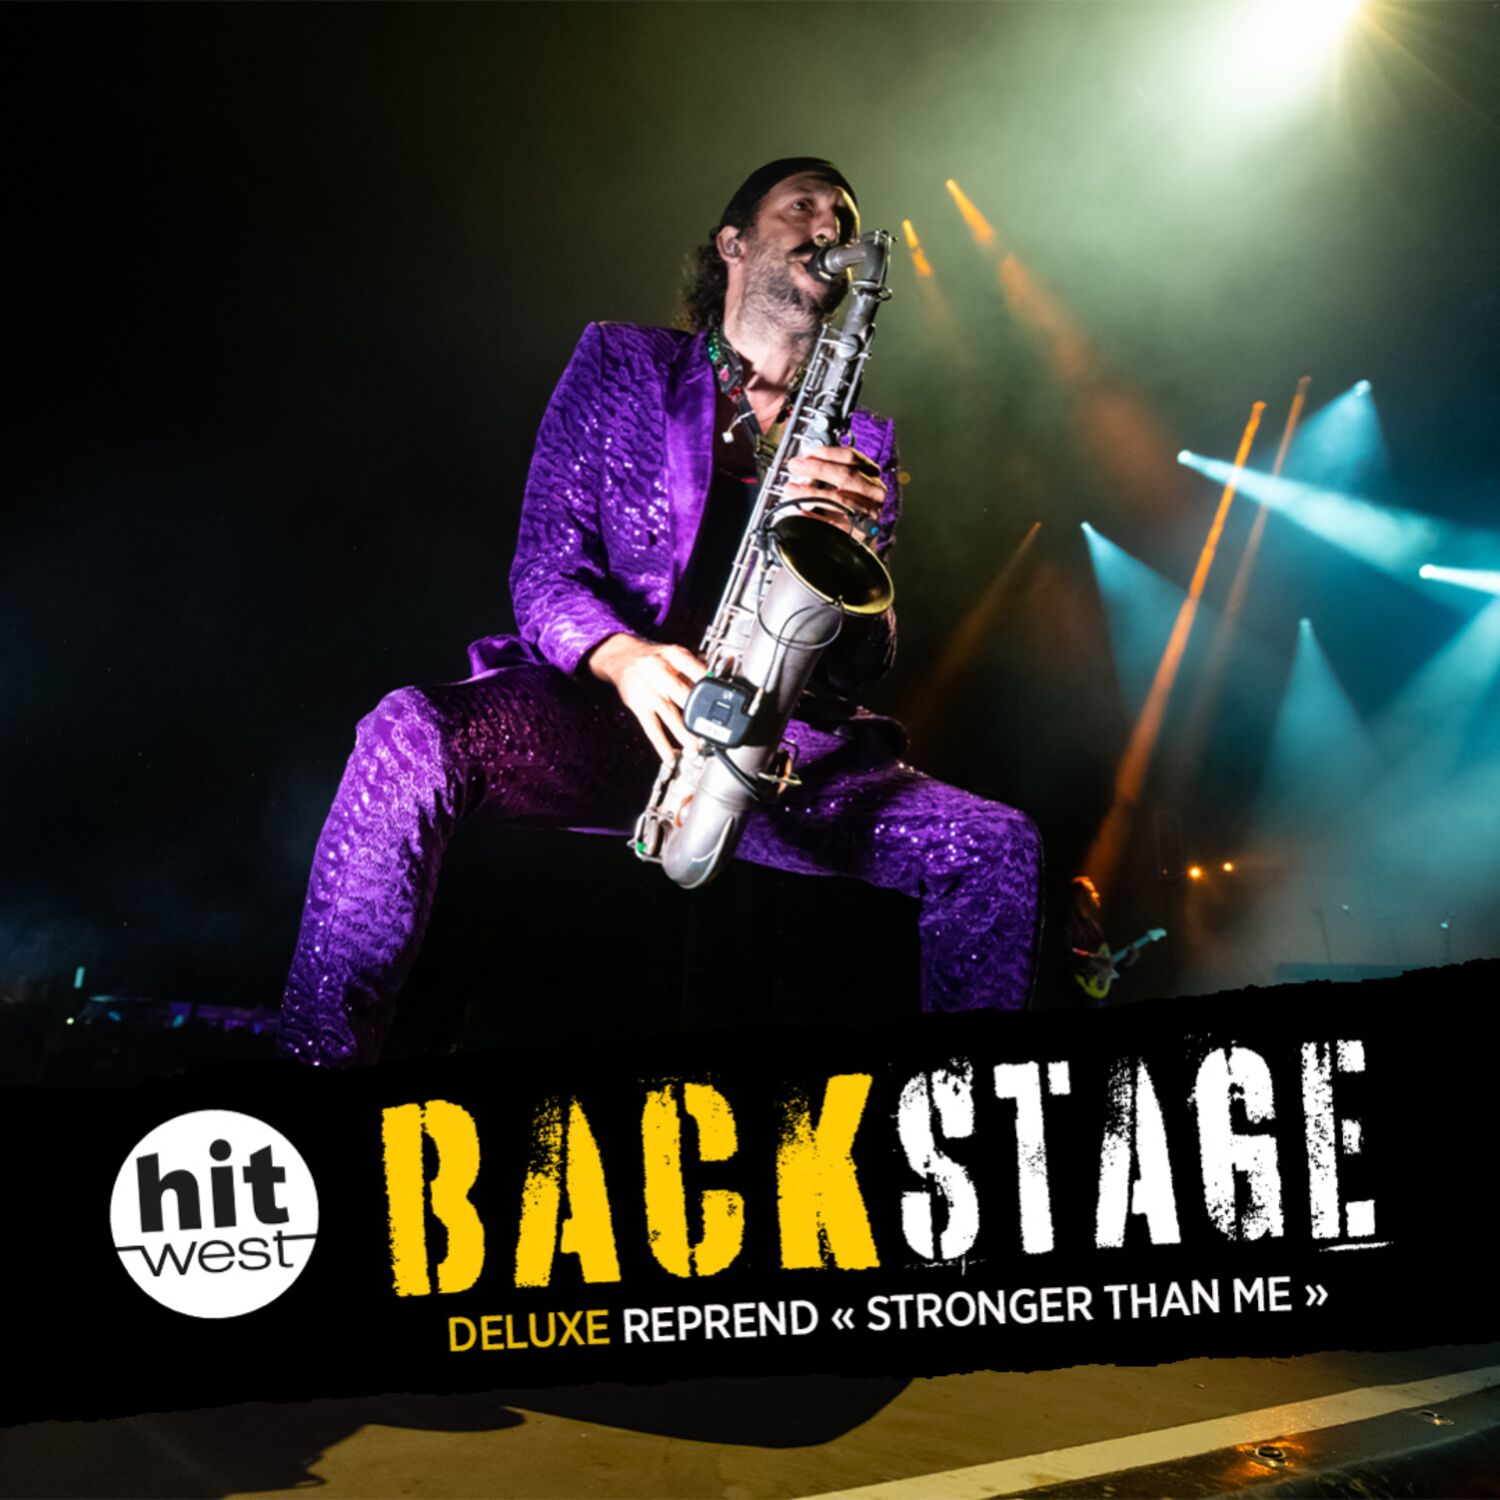 Deluxe reprend "Stronger than me" dans Backstage